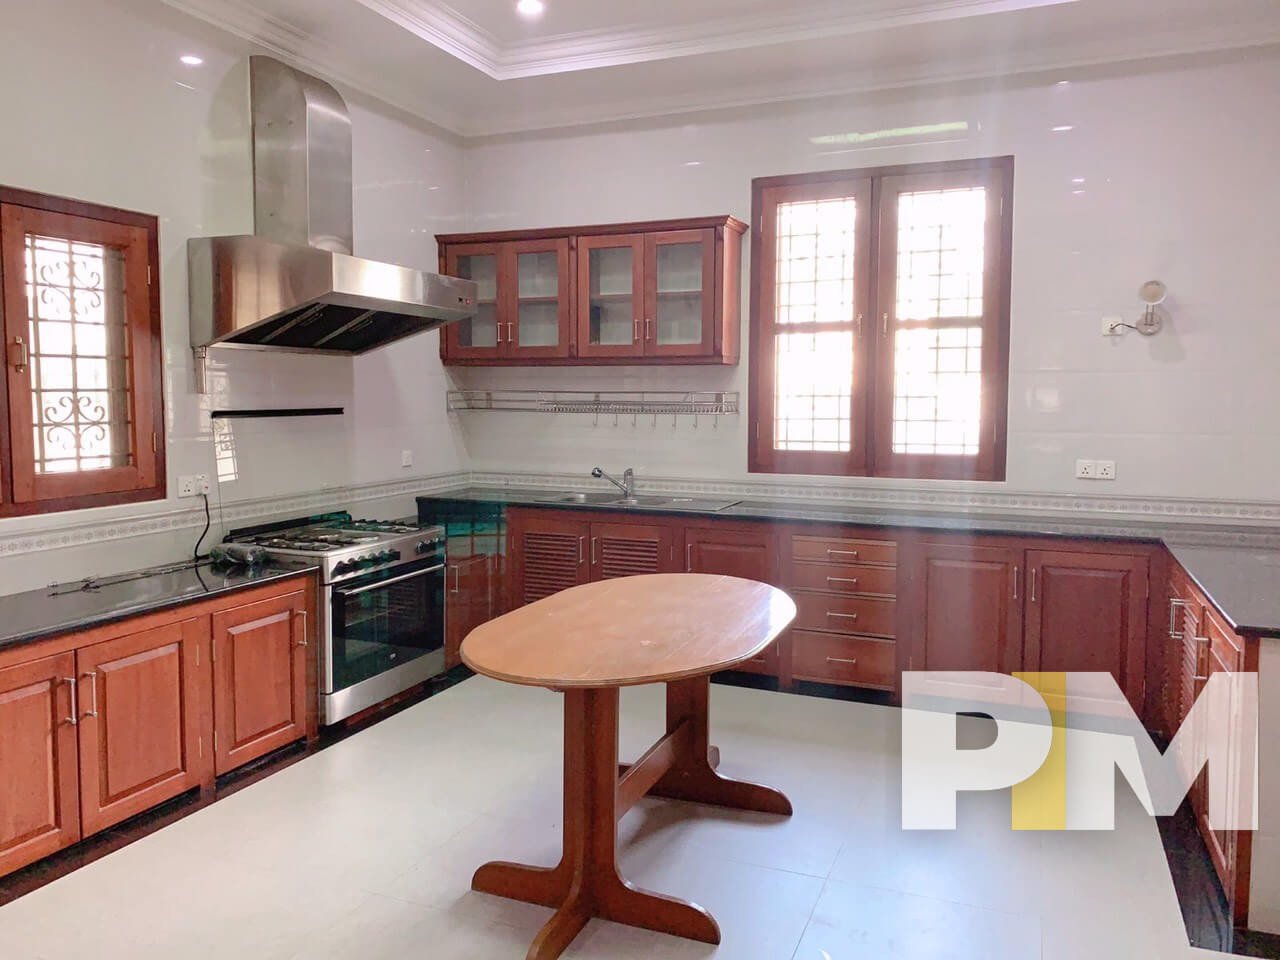 kitchen with oven - Home Rental Yangon